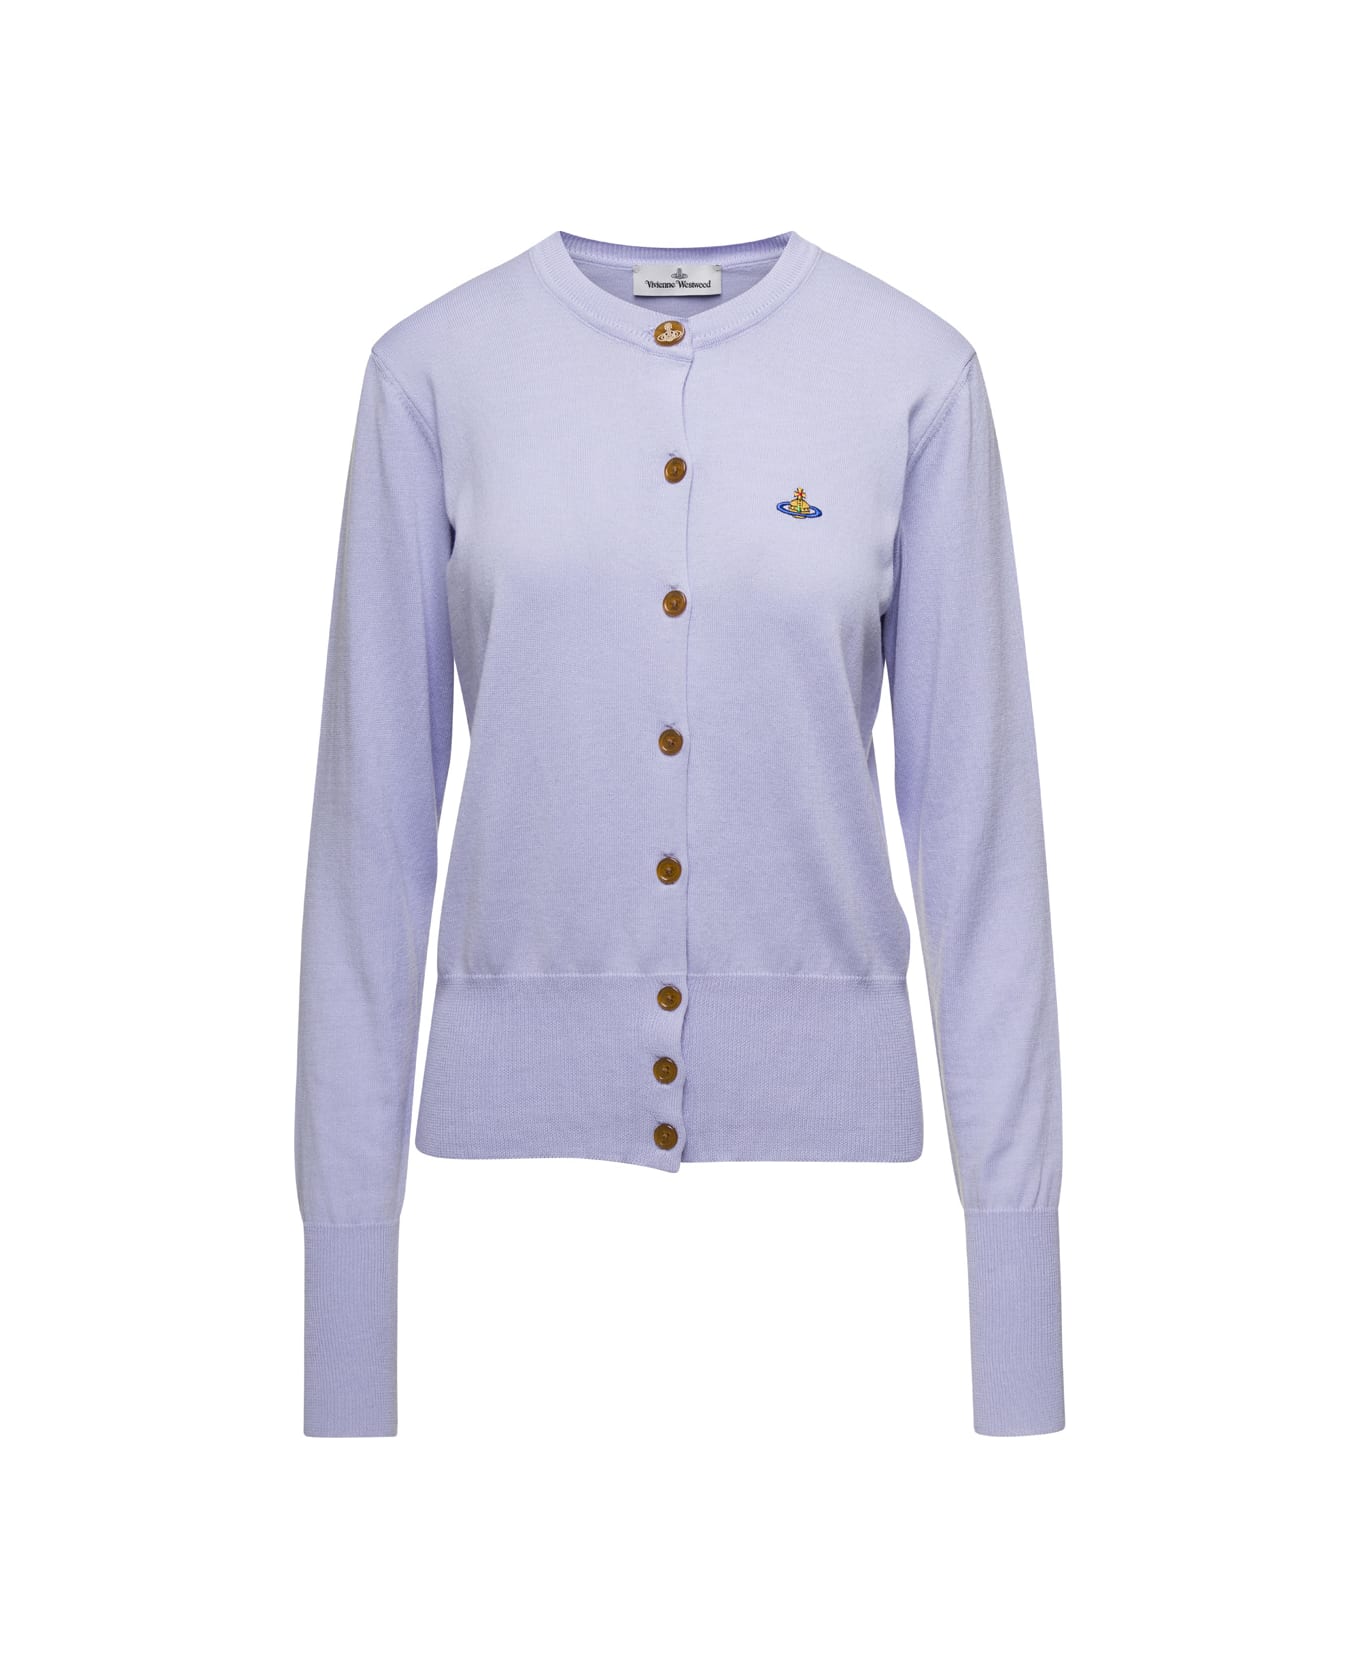 Vivienne Westwood Lillac Cardigan With Signature Embroidered Orb Logo In Cotton Woman - Violet ニットウェア